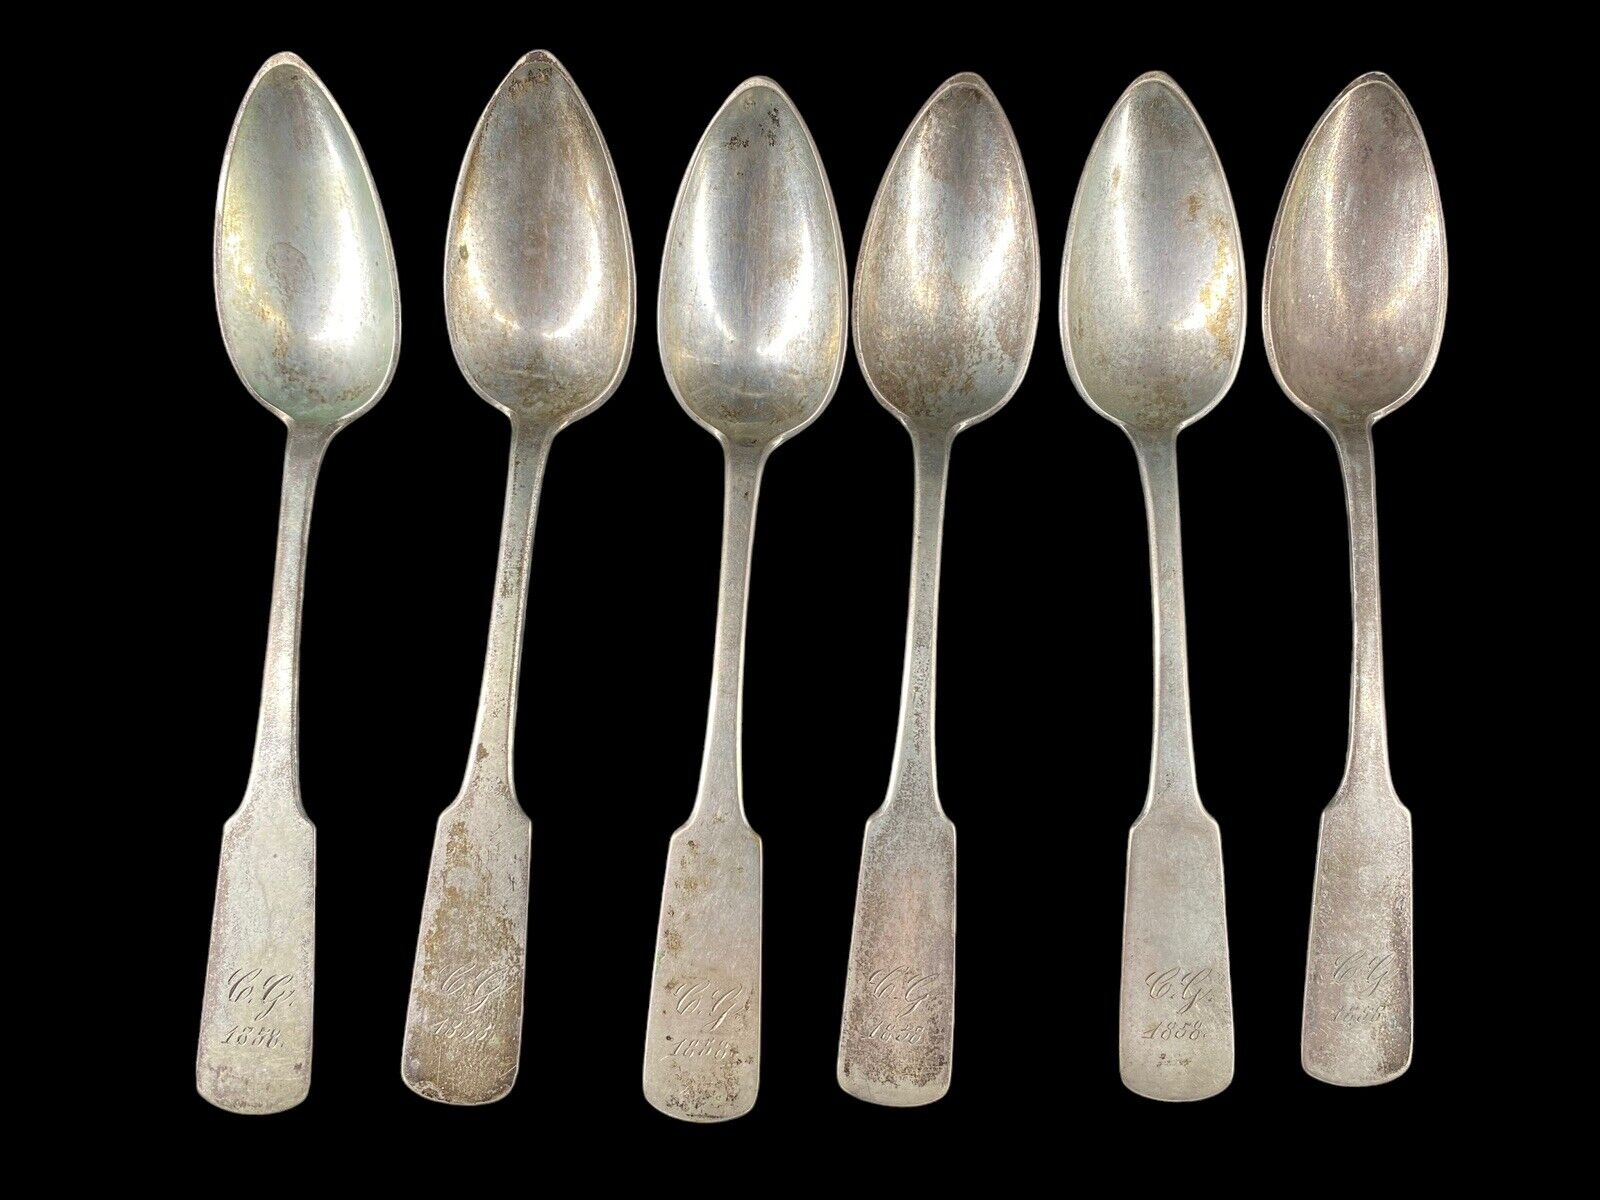 6 Antique 1858 German or Polish 800 Silver Spoons